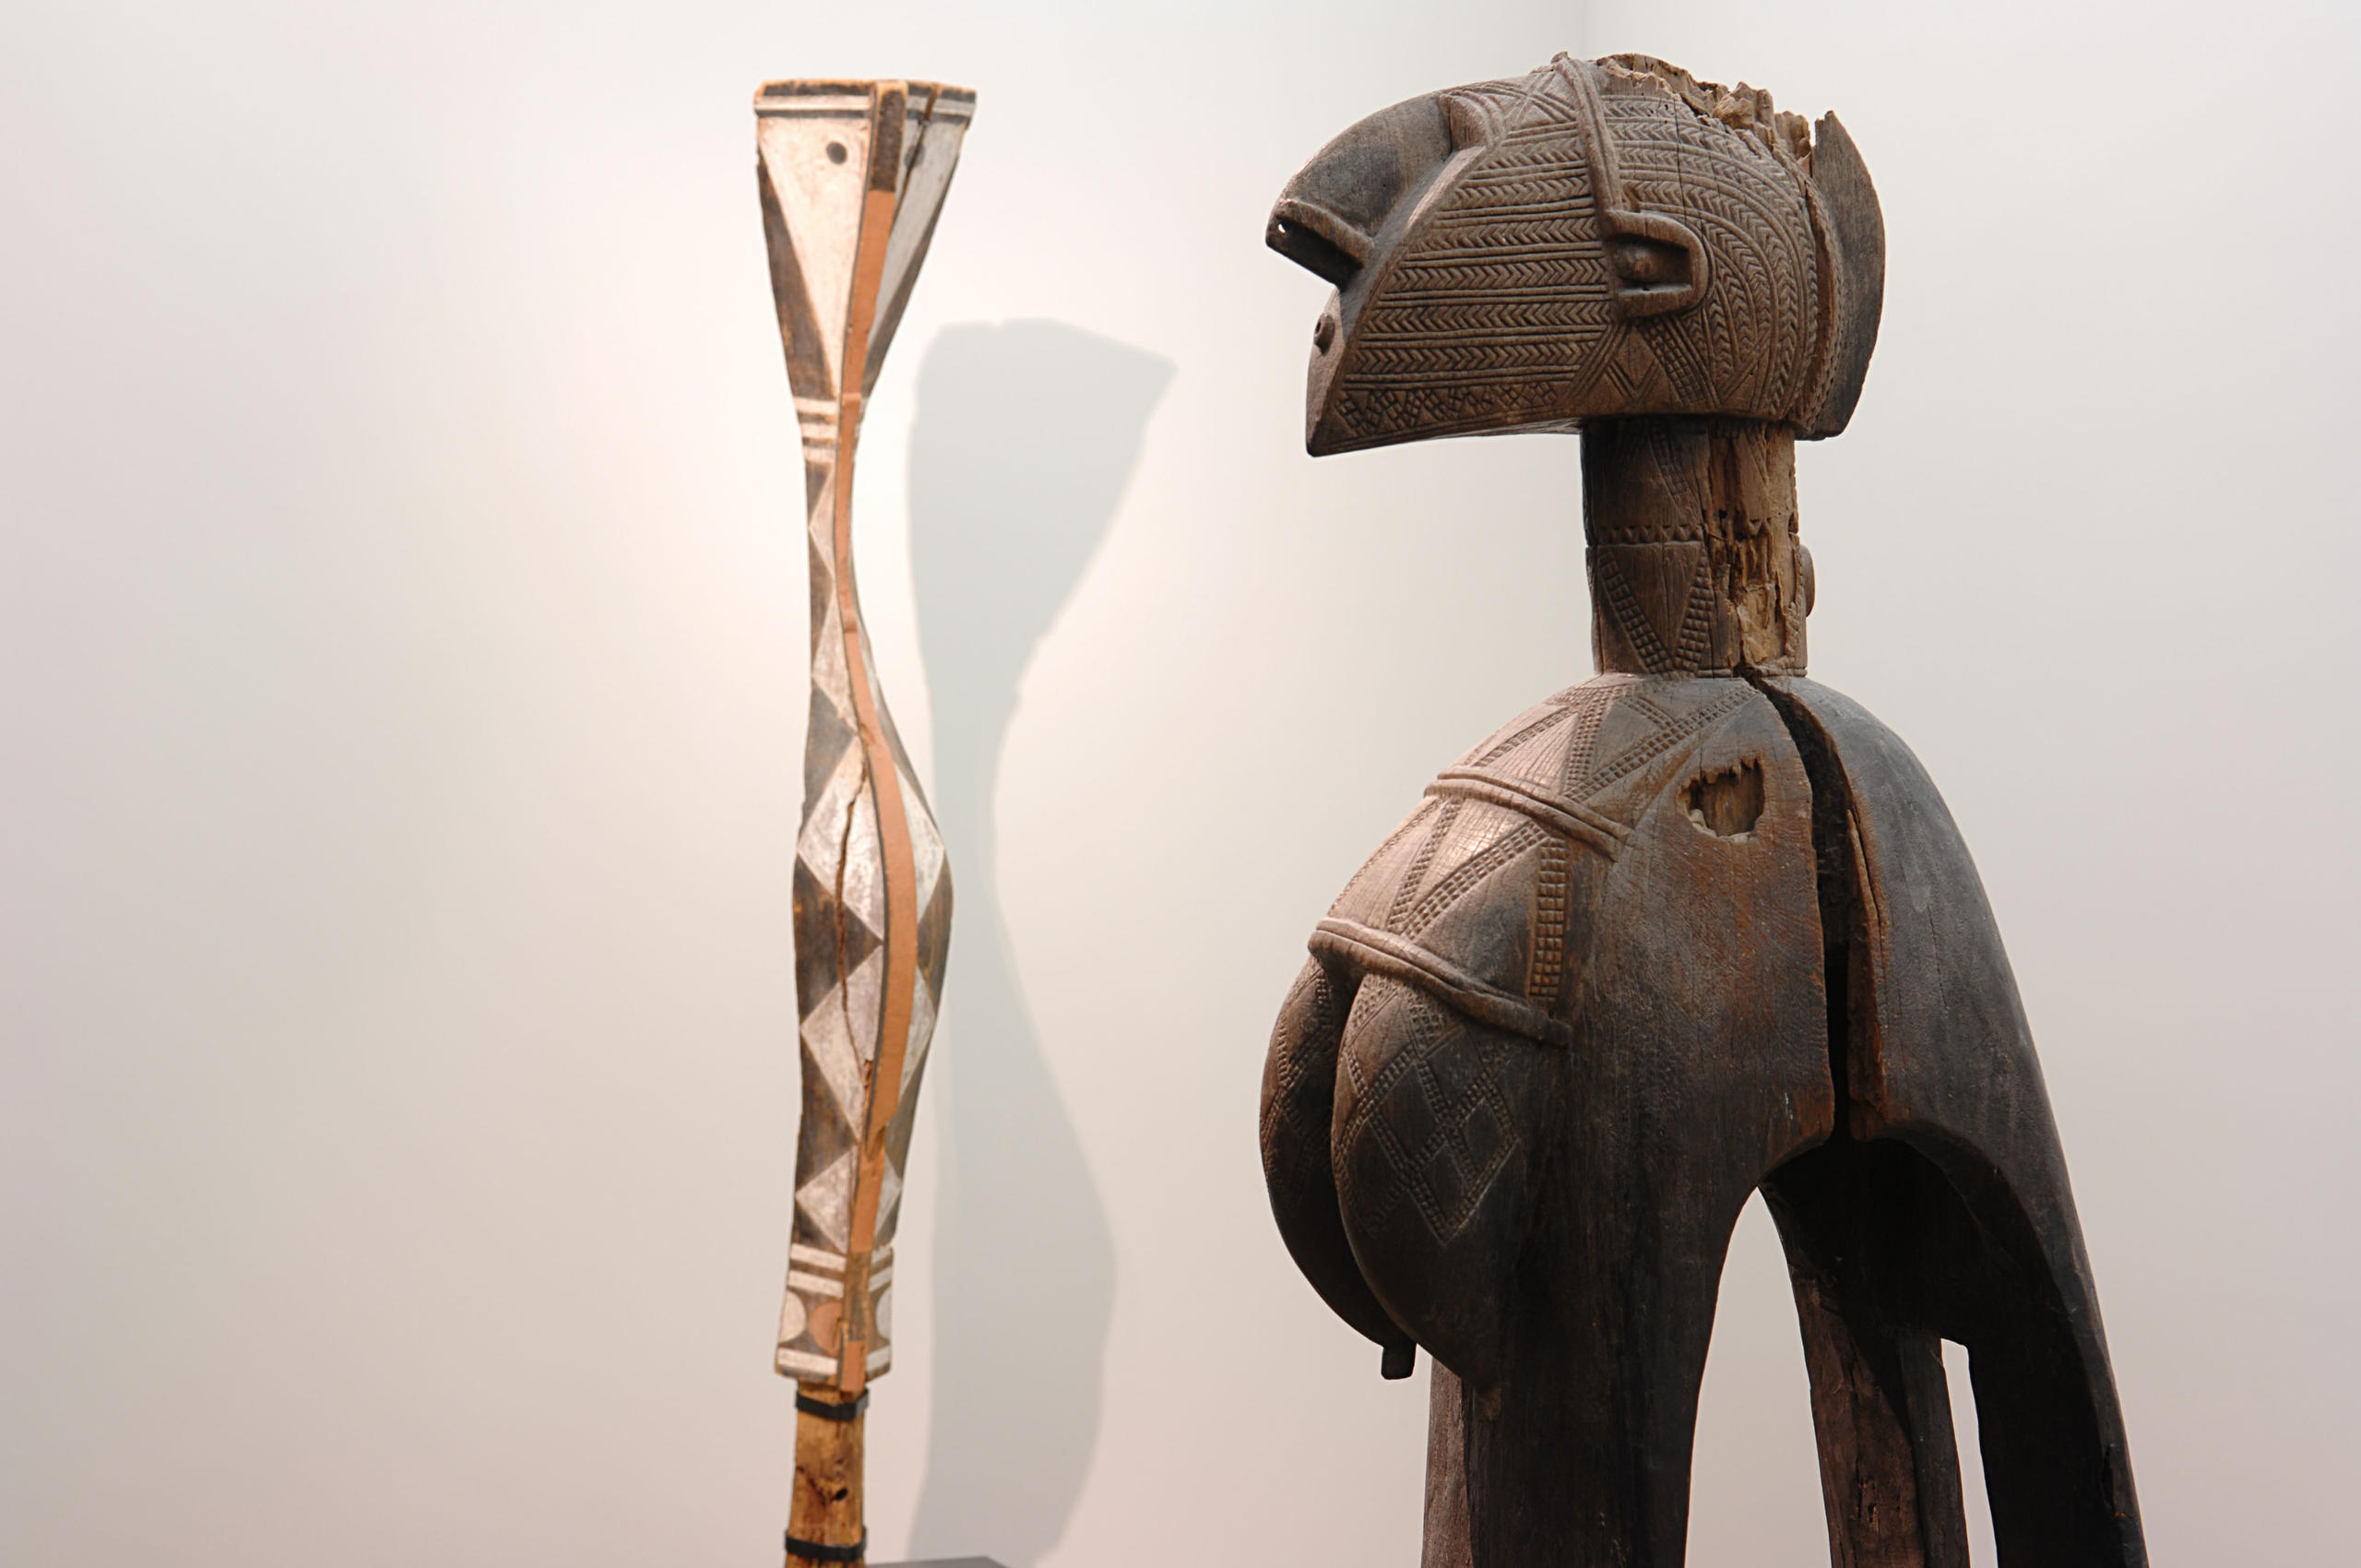 A sculpture from the Africa collection at the Rietberg Museum